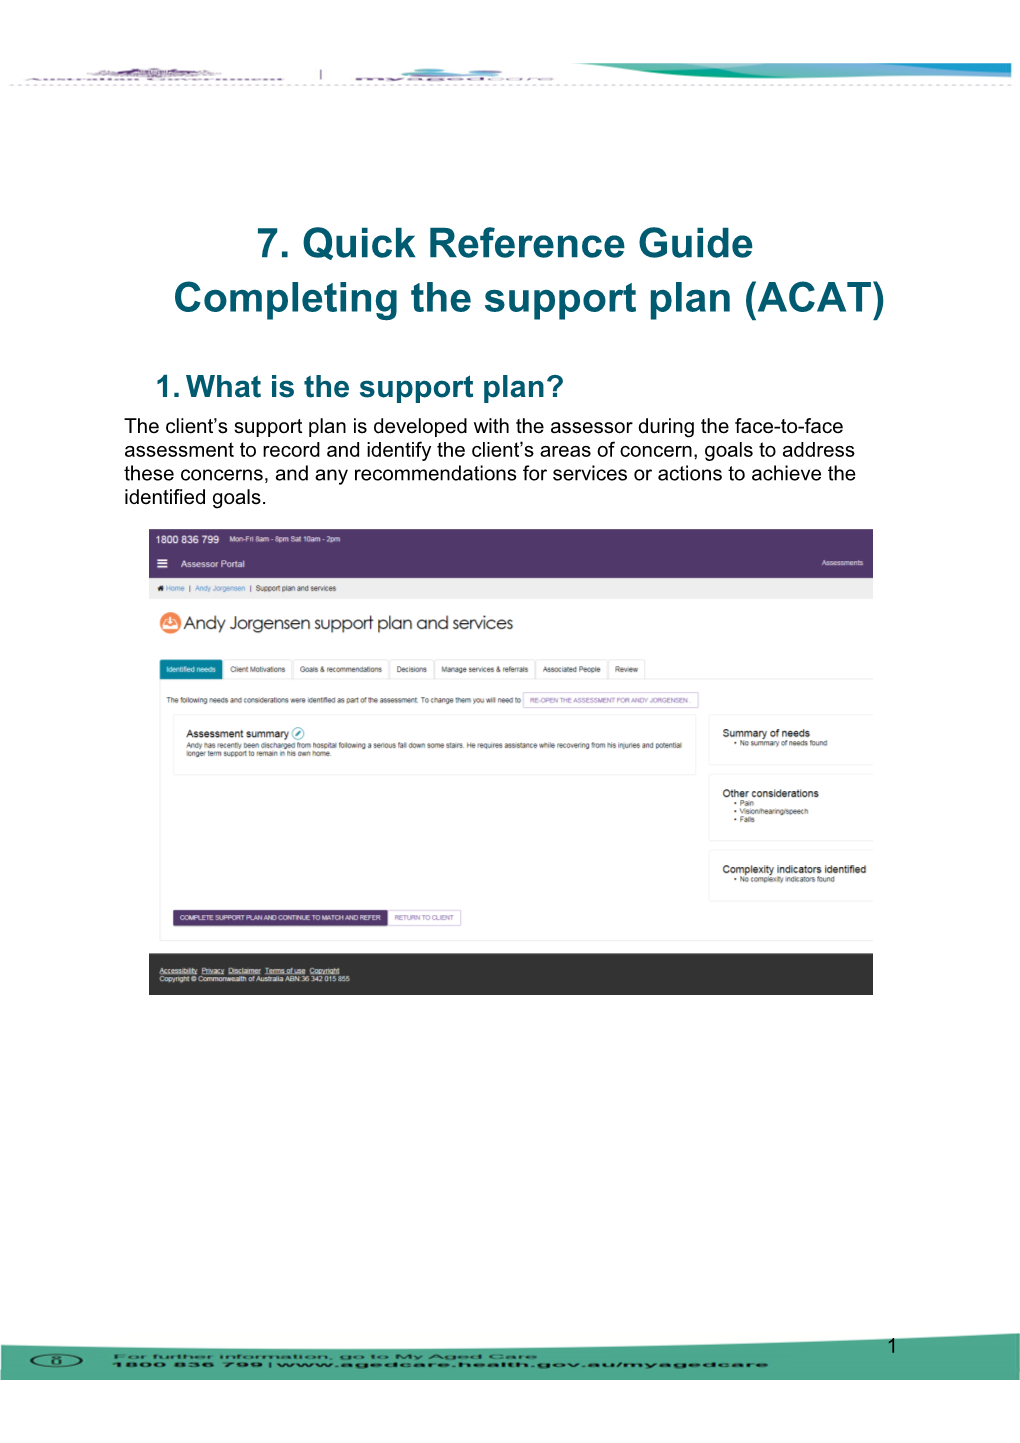 Quick Reference Guide Completing the Support Plan (ACAT)